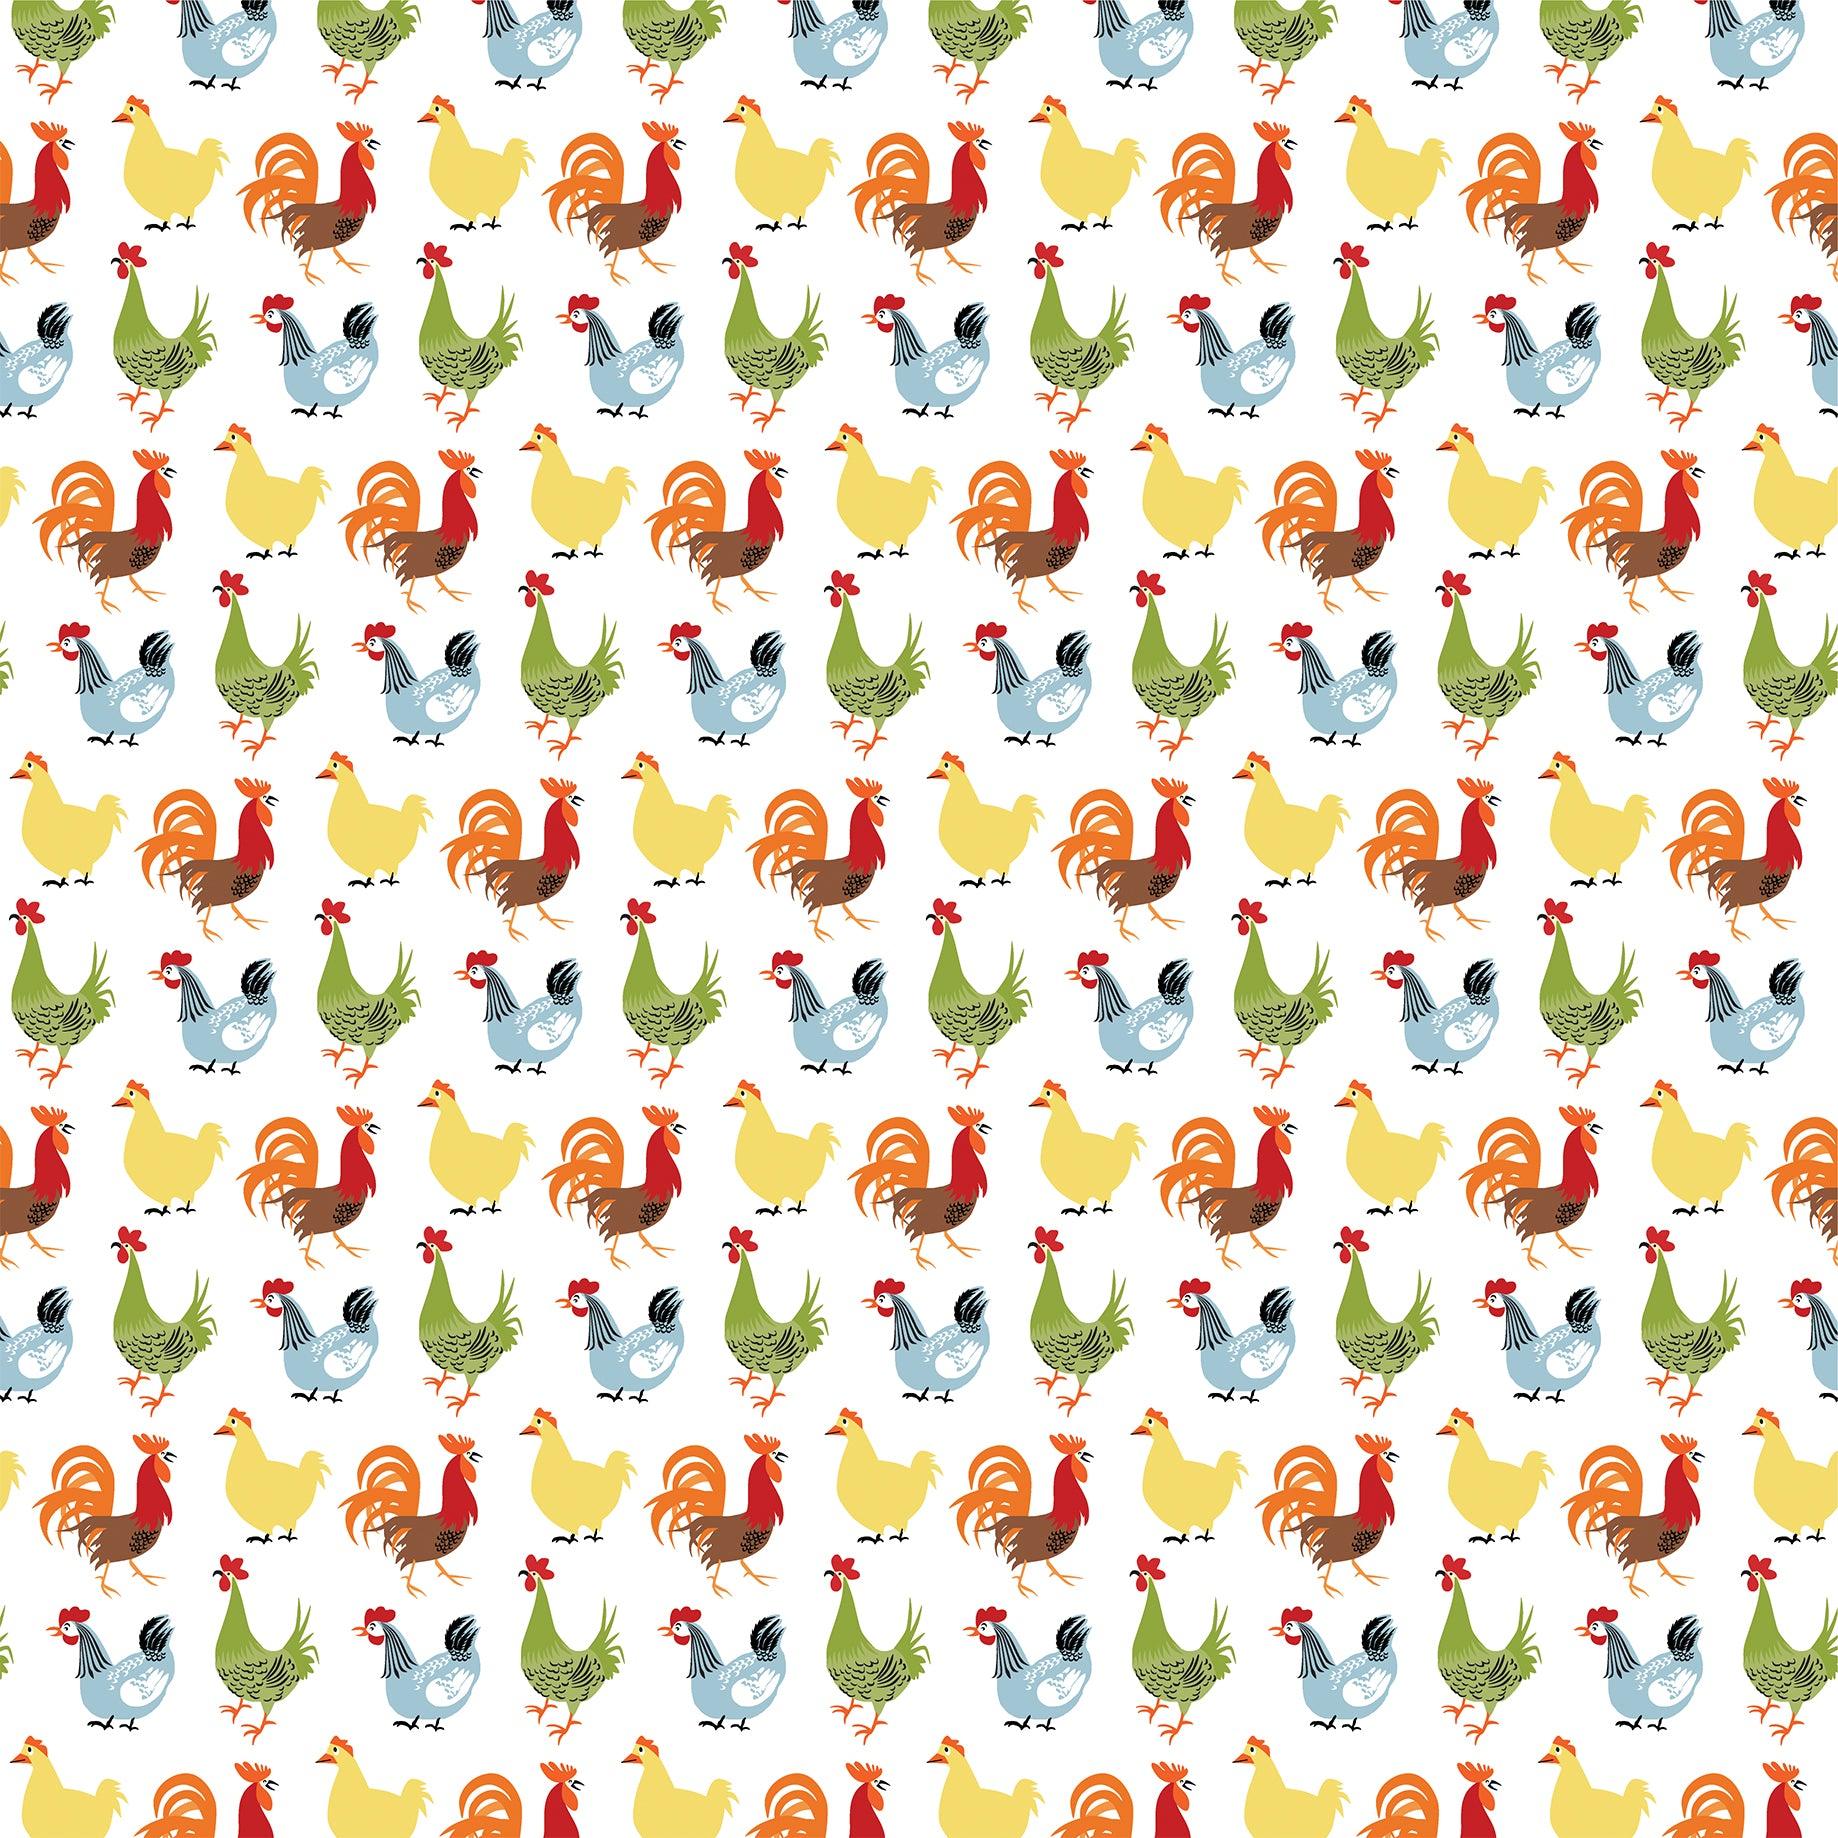 Farmhouse Living Collection Crazy Chickens 12 x 12 Double-Sided Scrapbook Paper by Carta Bella - Scrapbook Supply Companies